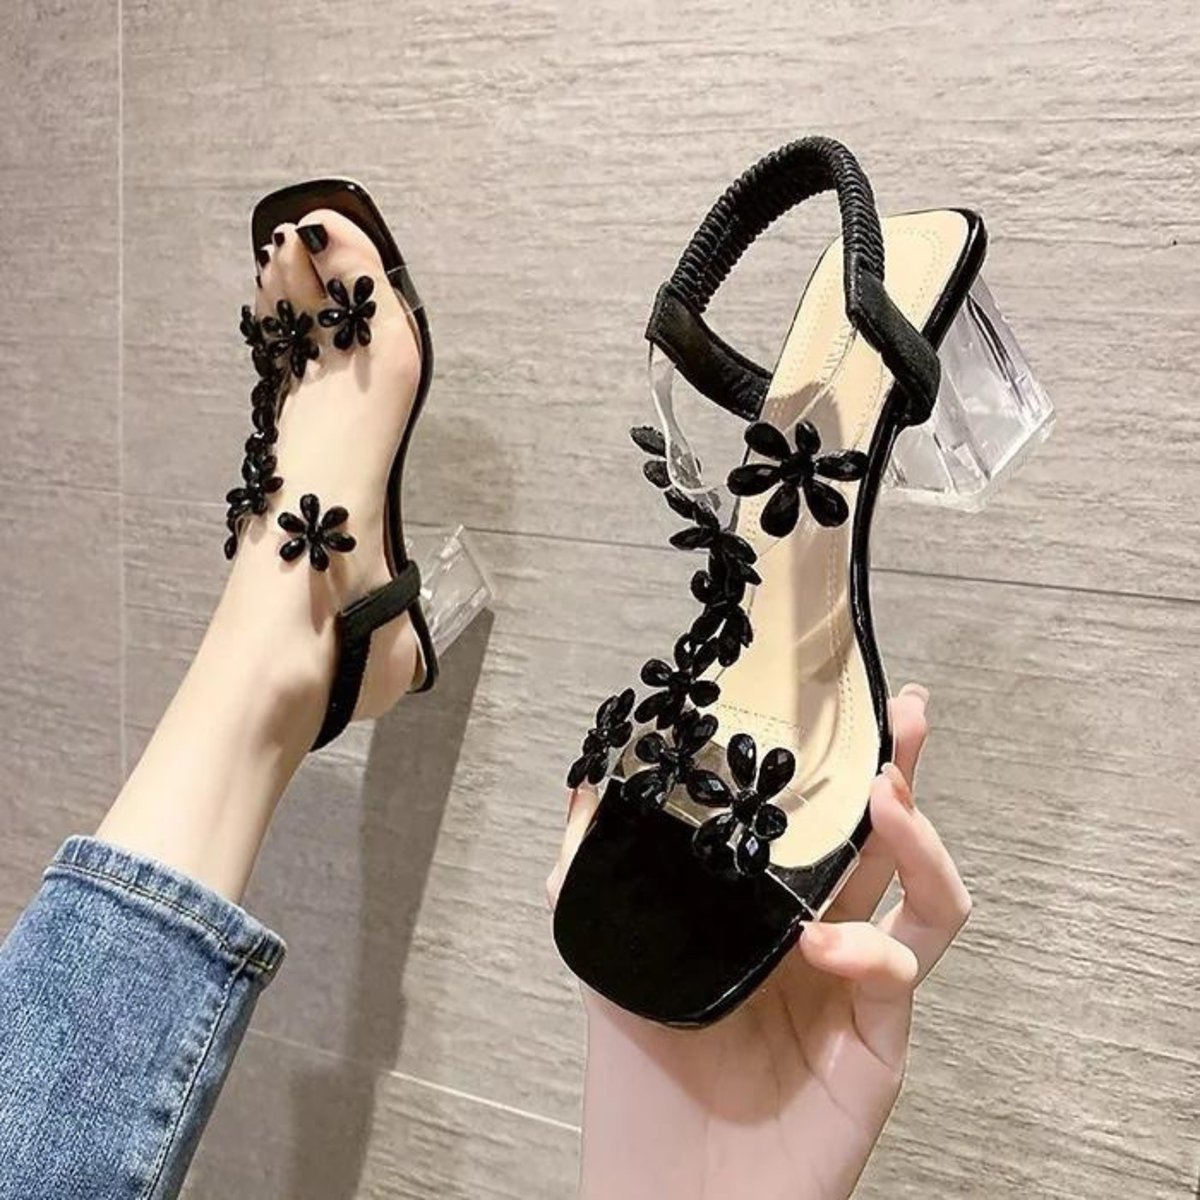 Step into style with these stunning Women's Crystal Flower Decoration Chunky Heel Peep Toe Elastic Band Shoes!
.
🛒Shop Now: wclfashionsoasis.com
.
#FashionGoals #CrystalHeels #ElegantFootwear #PeepToeHeels #ShoeObsession #womenshoes #shoes #fashion #shoesaddict #sexy #giral